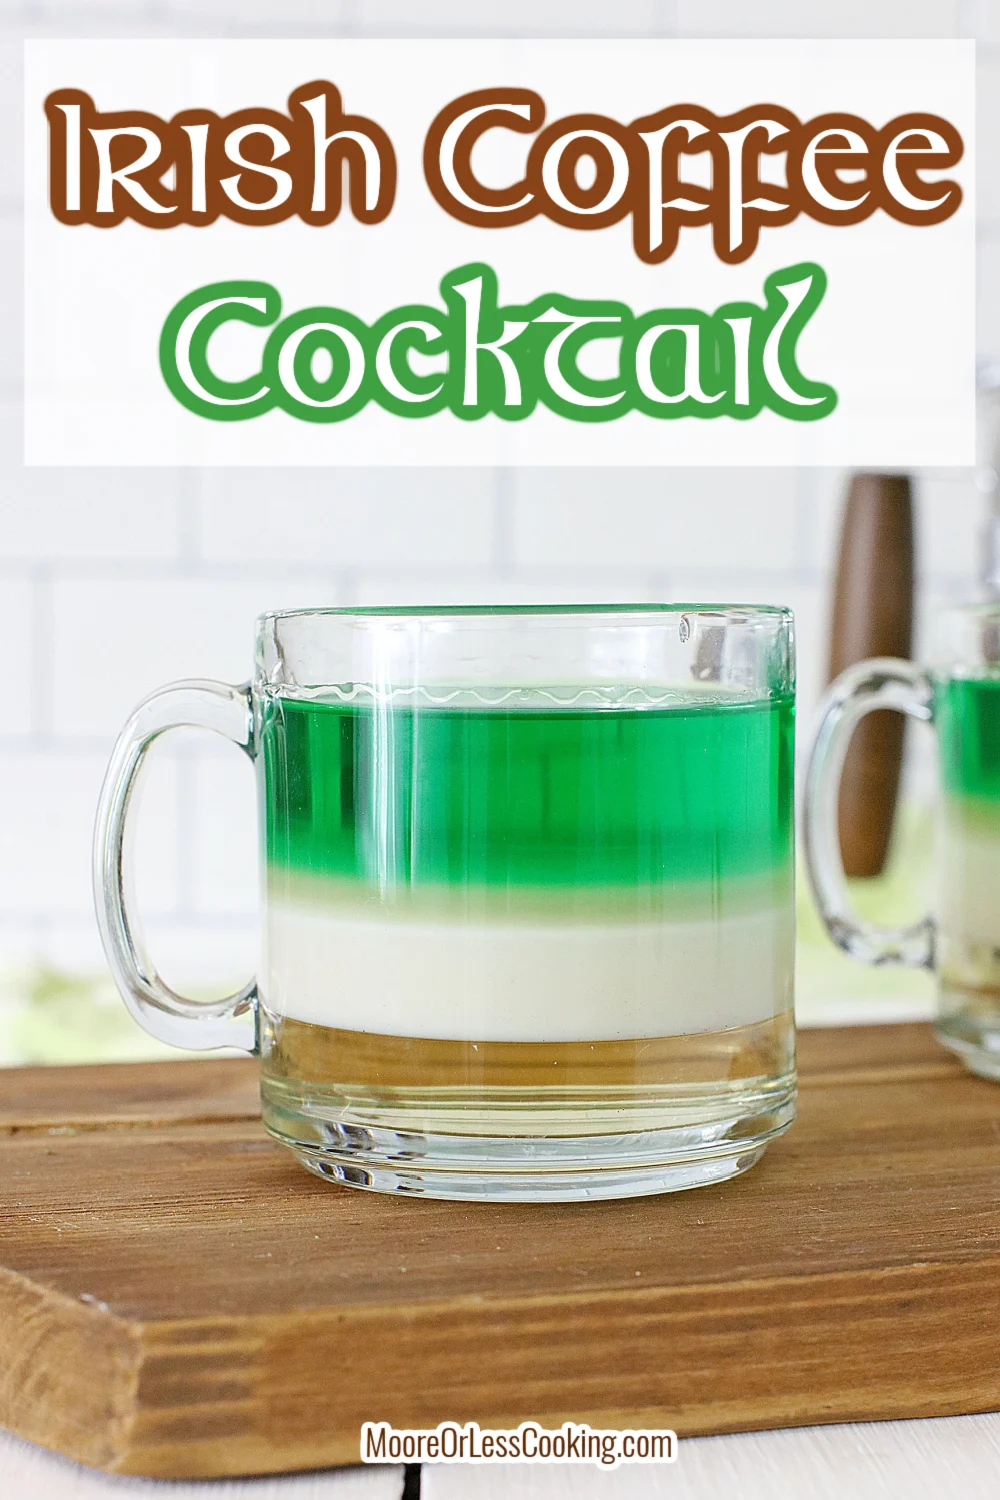 This eye-catching dessert cocktail is perfect for celebrating St. Patrick's Day! It's a fun way to add green to the classic Baileys Irish coffee drink and give it a festive look in a clear glass. The secret is using a cocktail layering tool that makes it easy to achieve as you pour each liquid in the glass. How easy is that? Up your Irish Coffee game with this creative cocktail! via @Mooreorlesscook